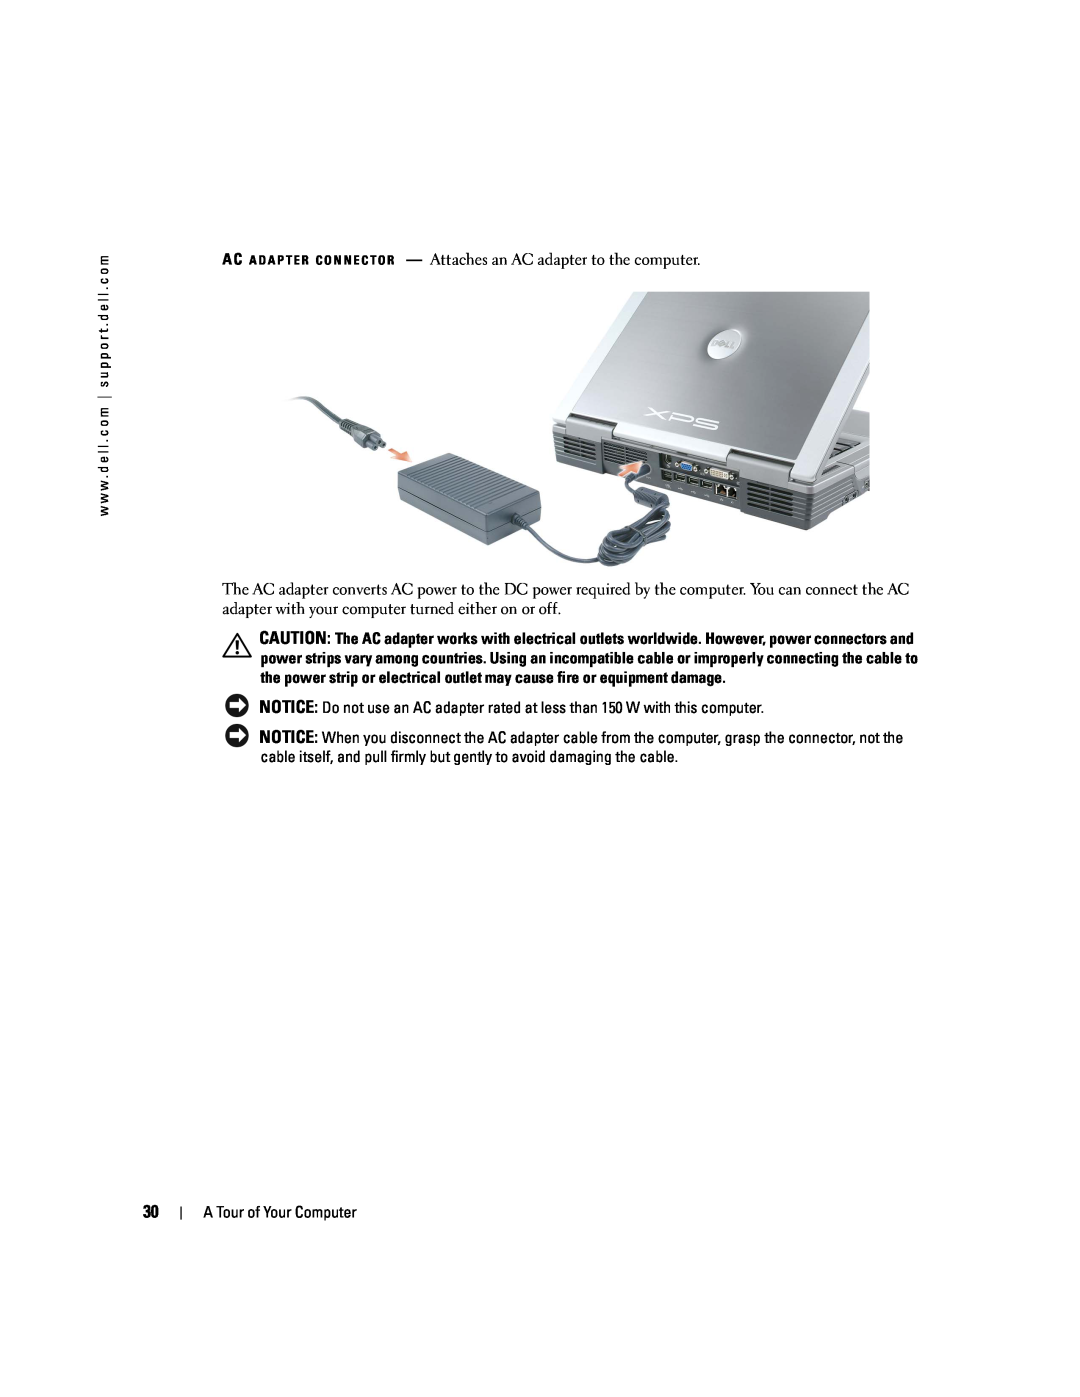 Dell PP09L owner manual A Tour of Your Computer 